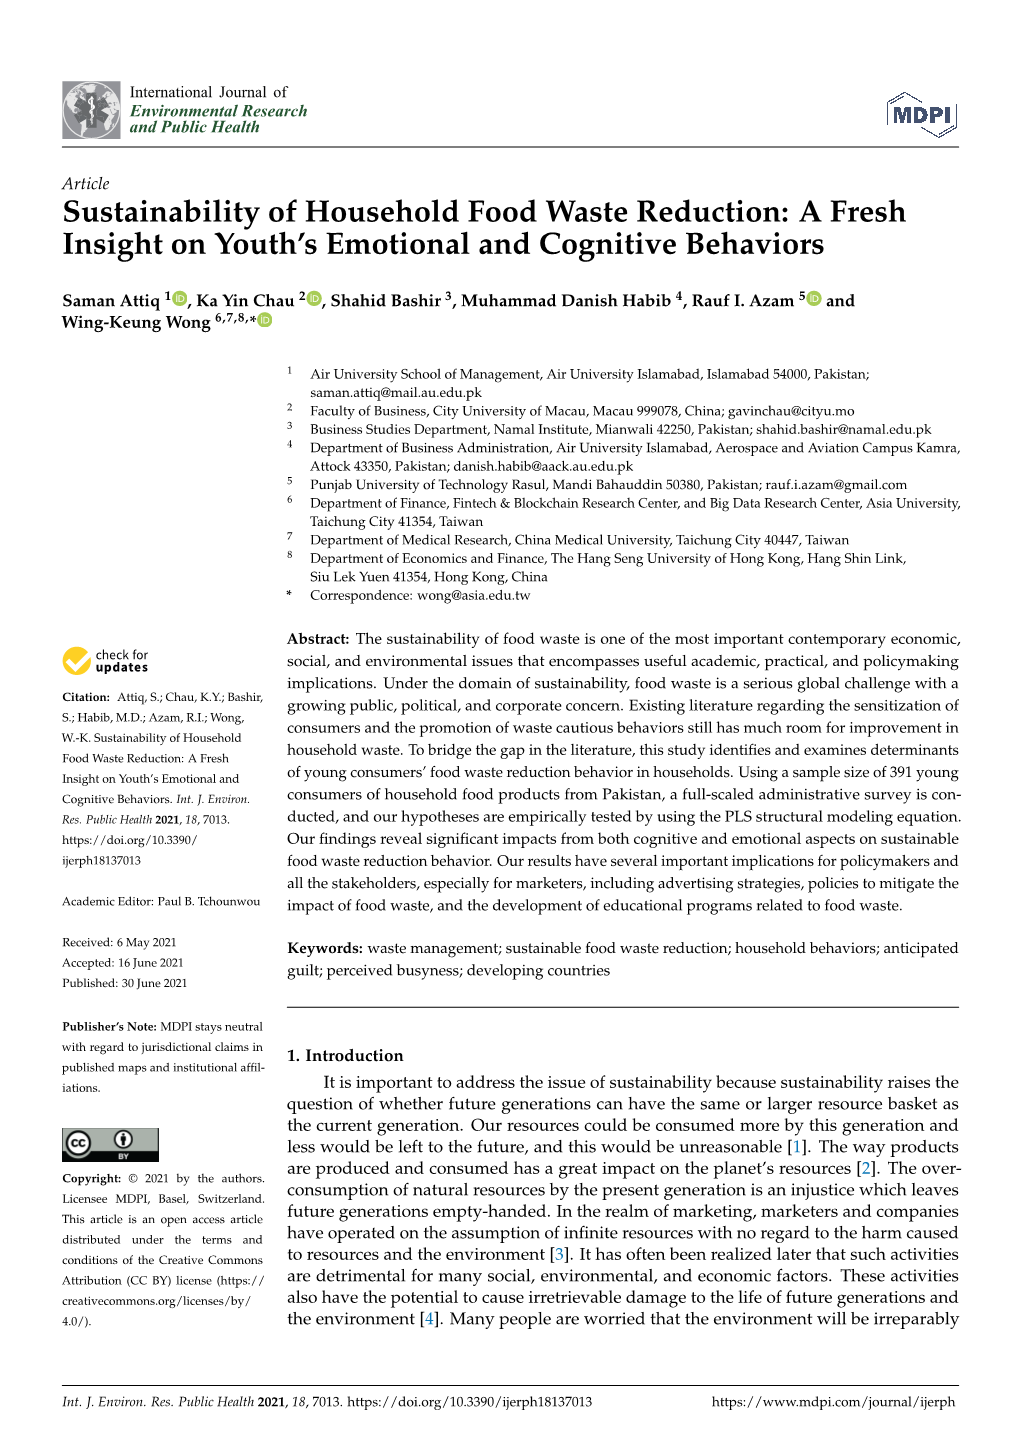 Sustainability of Household Food Waste Reduction: a Fresh Insight on Youth’S Emotional and Cognitive Behaviors